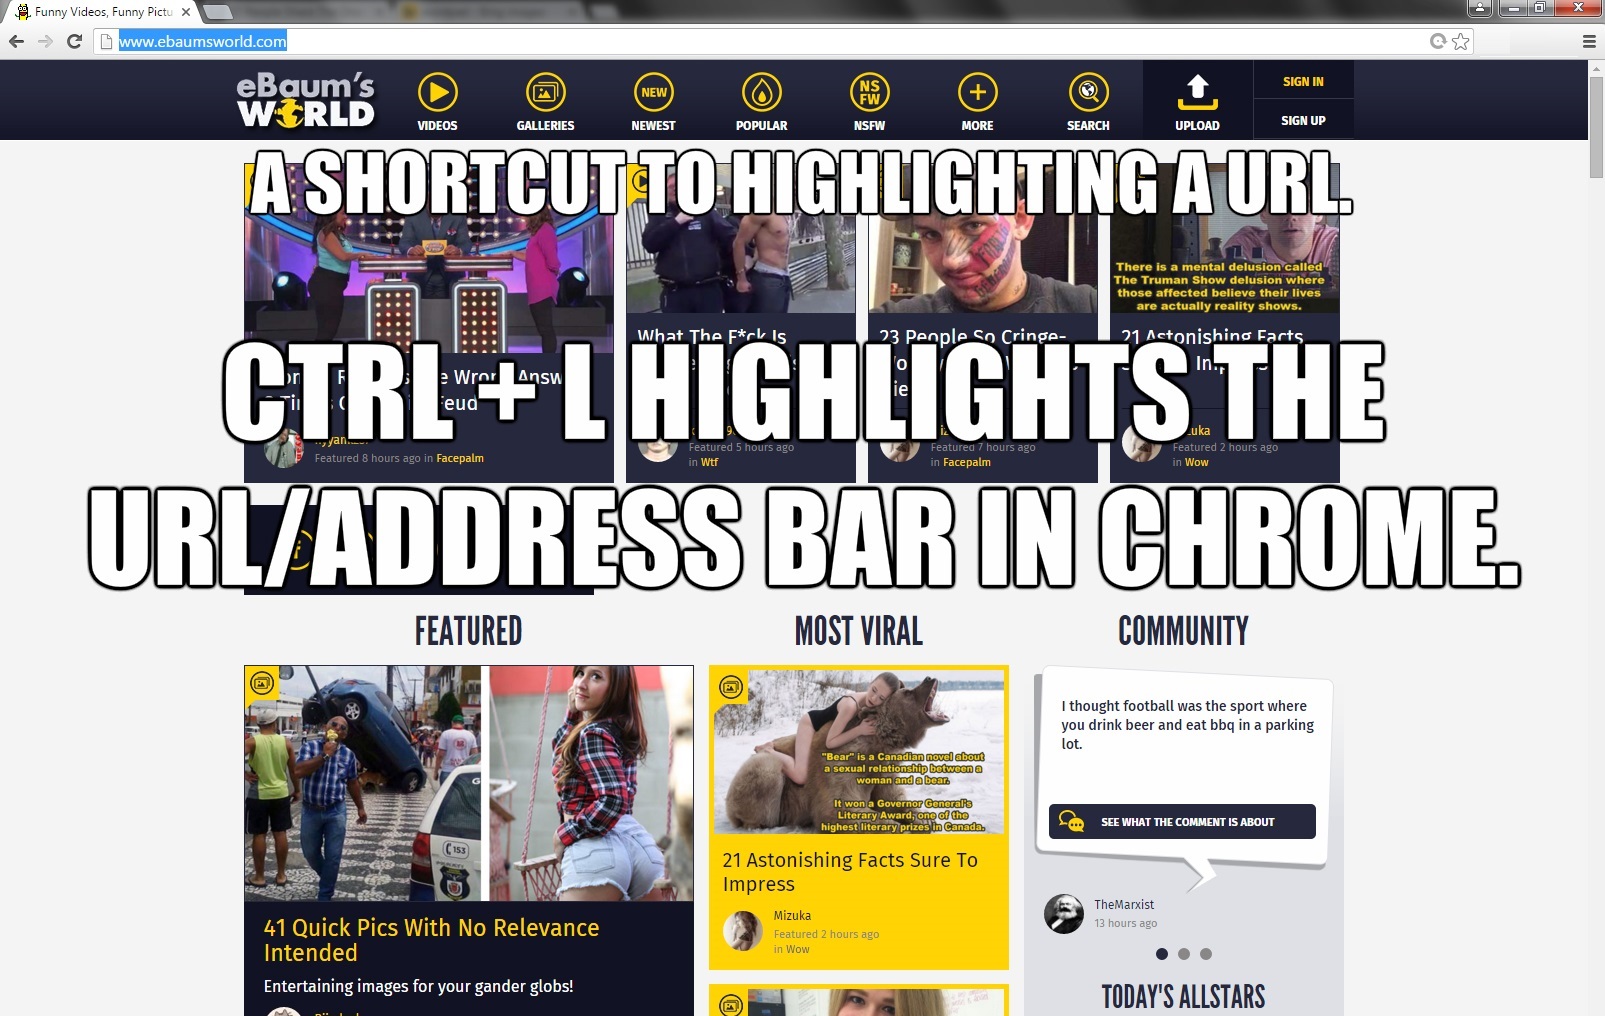 media - y Video A Shortcut To Highlighting A Url Ctrl L Highlights The Url Address Bar In Chrome Featured Most Viral Community ithout football as the part where you drink bon and wit bbq in a parking S U Corrento 21 Astonishing Facts Sure To Impress 41 Qu